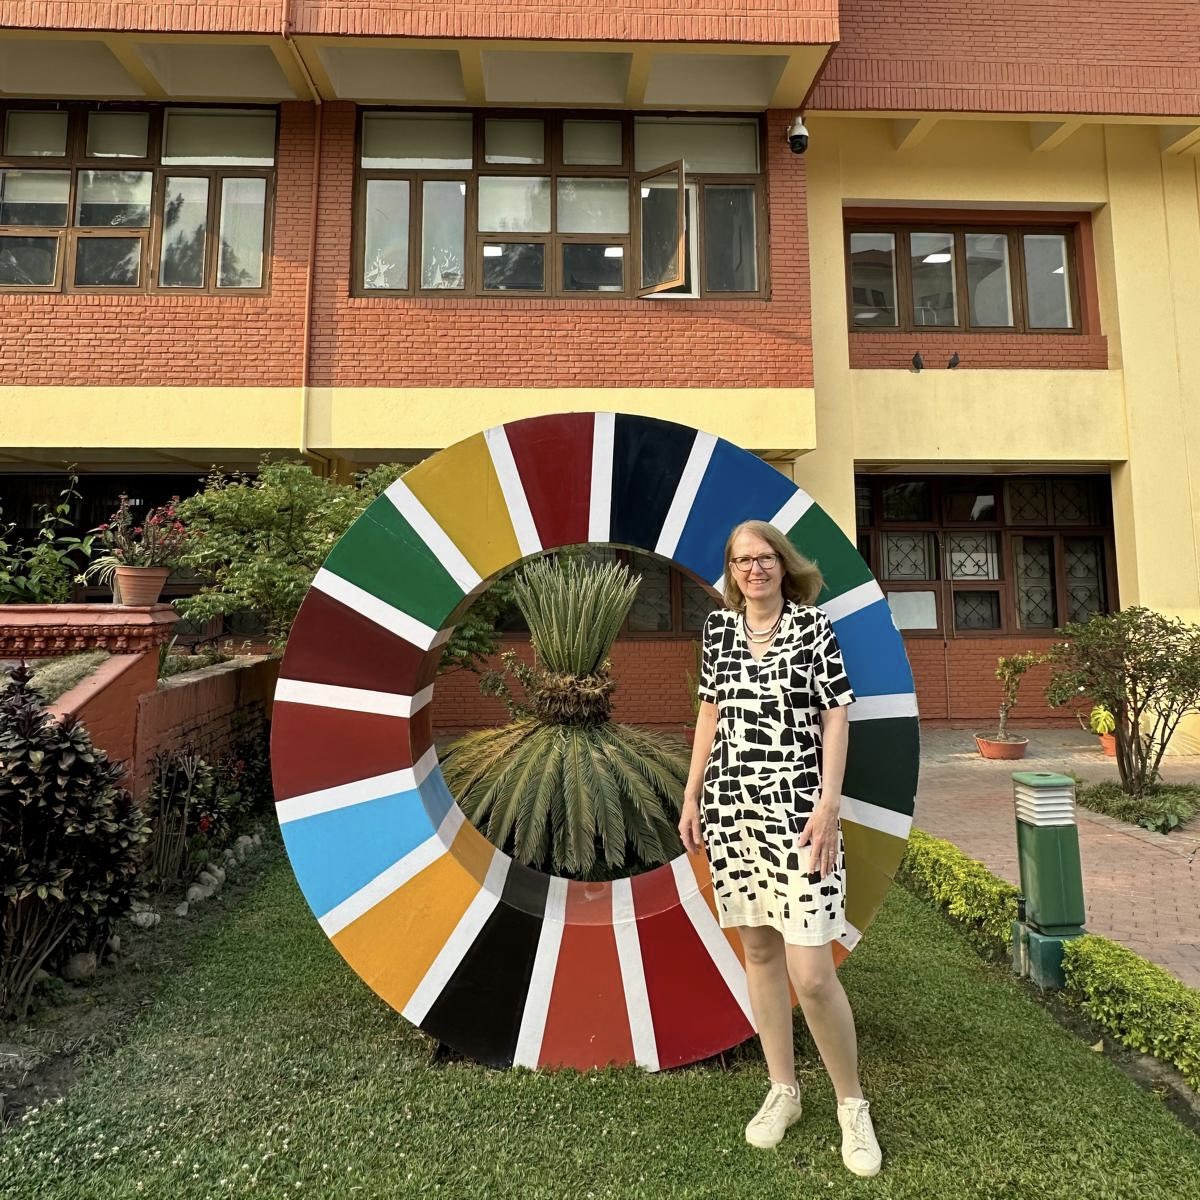 Building resilience is imperative in a world of climate uncertainty. Delighted to deliver this key message at the ABCD workshop this past week, as well as to connect with @SingerHanaa and UN agencies in Nepal. Only together can we pave a more resilient future 🌱 #ResourceNexus